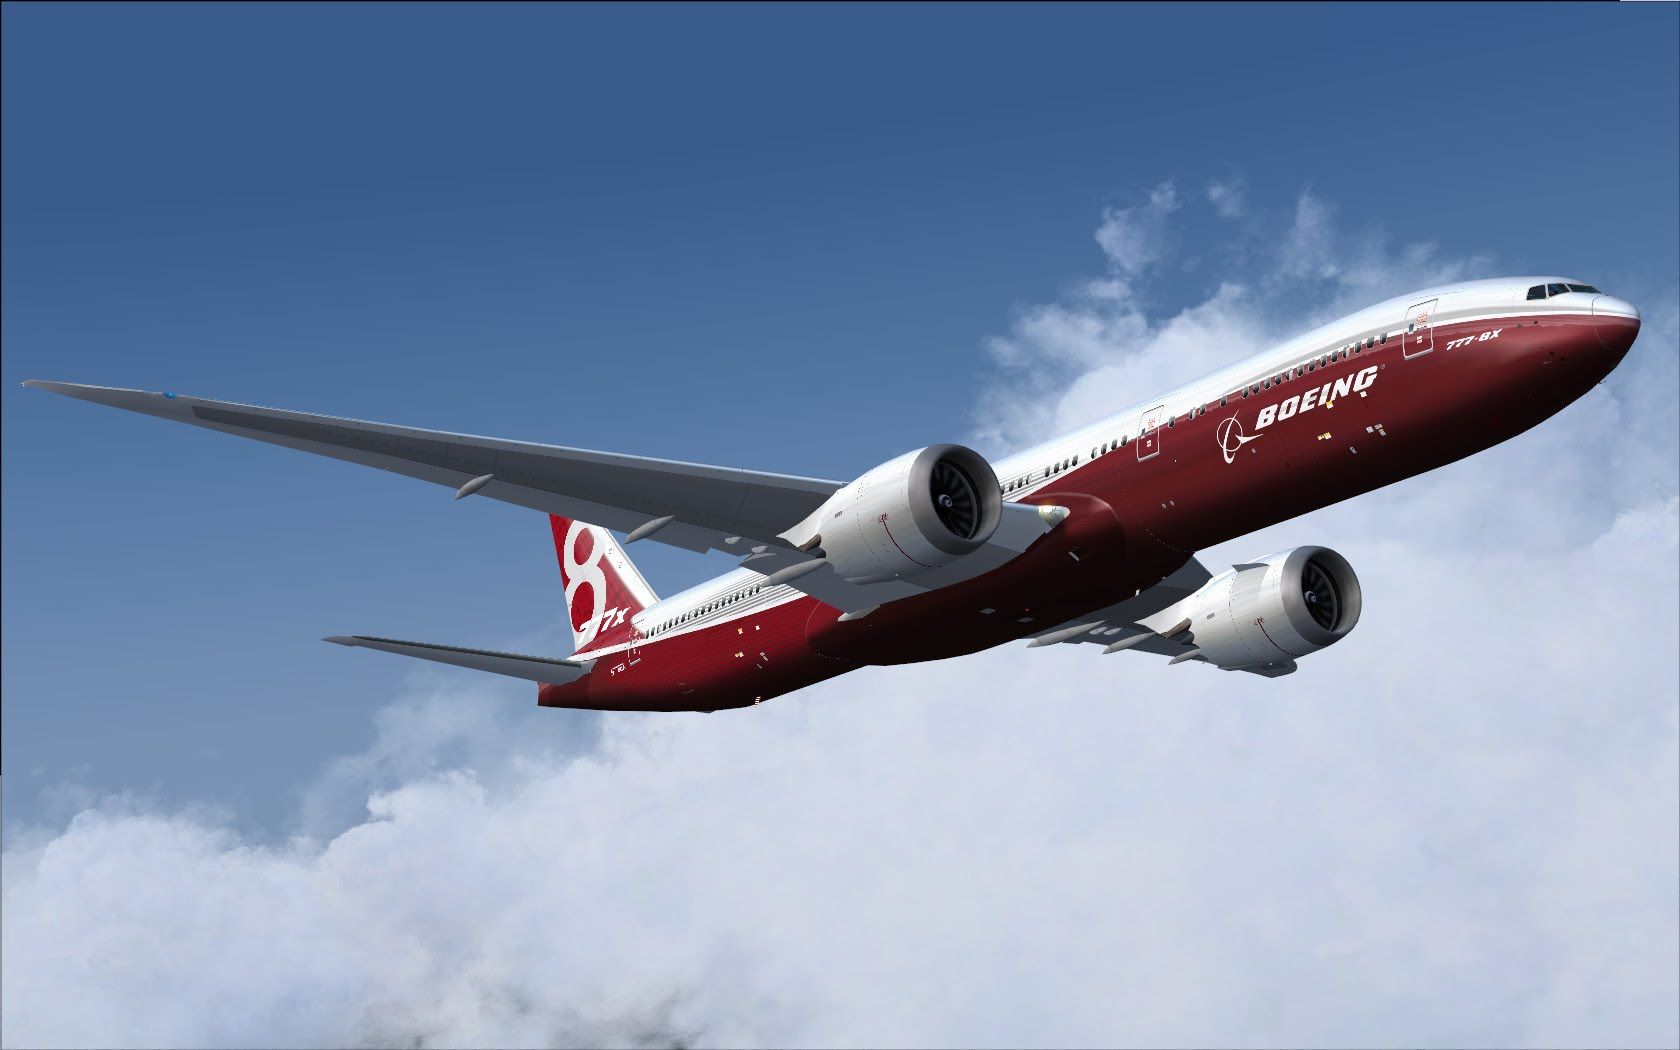 IAI Gears to Begin Delivery of 777X Assemblies in 2017